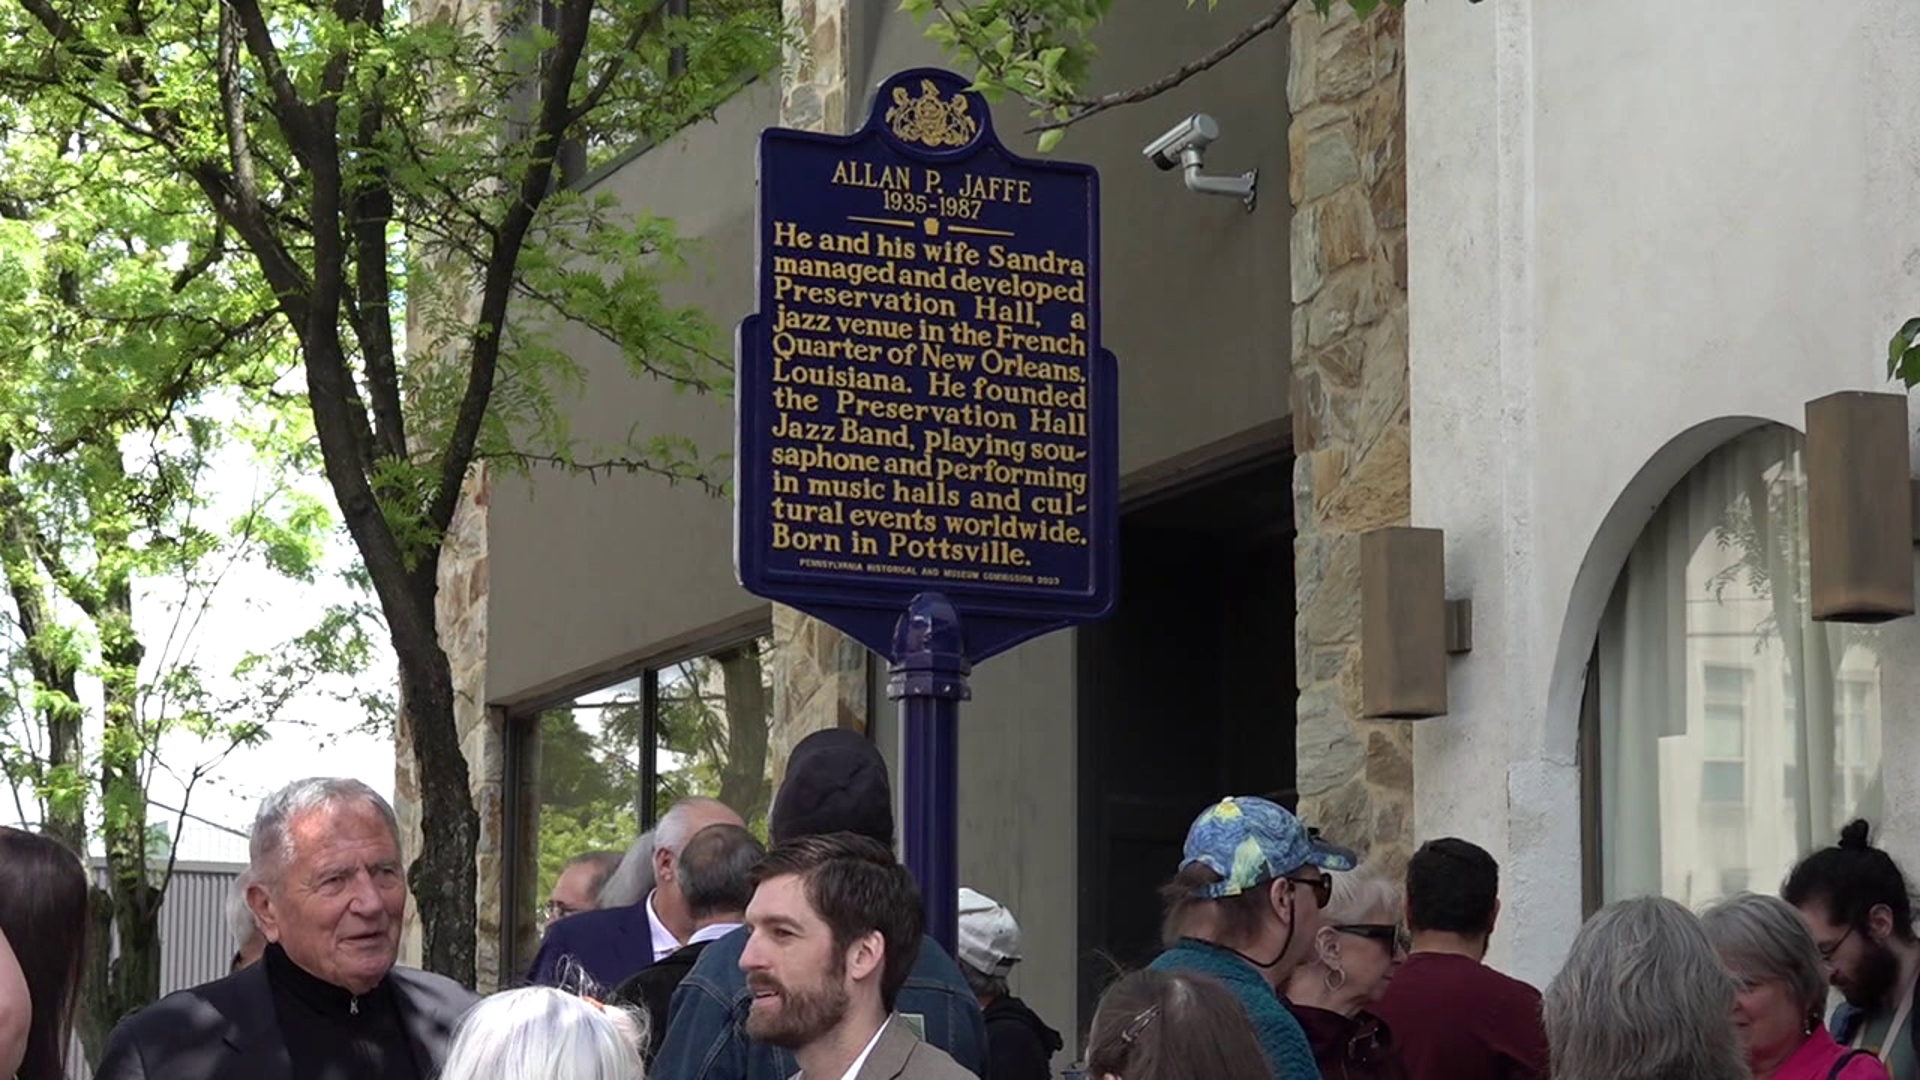 A community honored musician and Schuylkill County native Allan Jaffe who made waves in the New Orleans jazz scene in the 1960s.